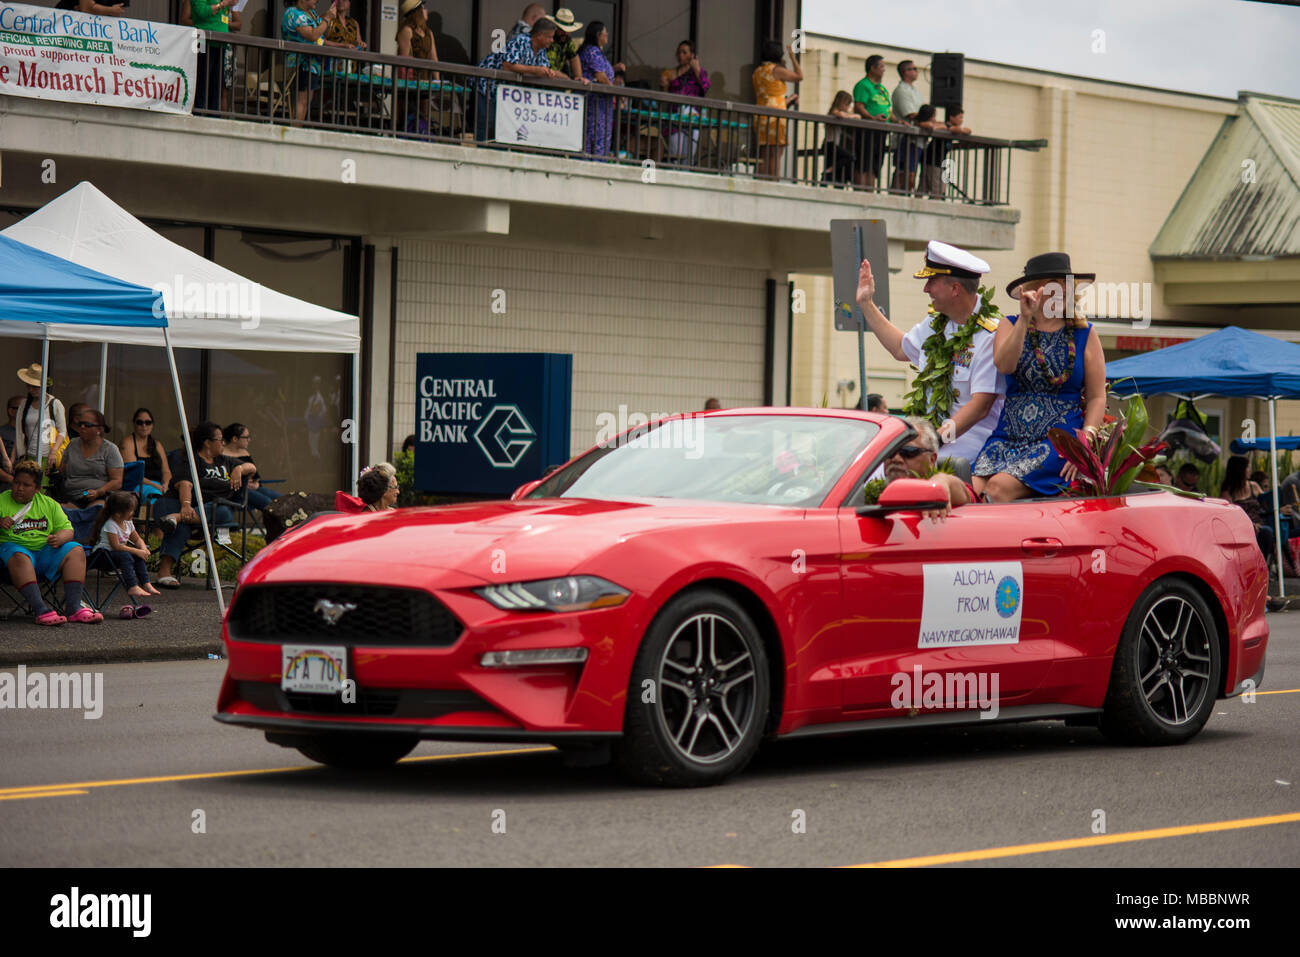 HILO, Hawaii (April 7, 2018) -- Rear Adm. Brian Fort, Commander Navy Region Hawaii, and his wife  greet spectators during the Merrie Monarch Festival Parade in downtown Hilo on Saturday April 7. Fort along with the Pacific Fleet Band, participated in the parade. The Navy recognizes that the Merrie Monarch Festival honors the legacy left by King David Kalākaua, who inspired the perpetuation of Hawaiian traditions, native language and arts. King Kalākaua negotiated a treaty with the United States that led to the Navy’s presence at Pearl Harbor. (U.S. Navy Photo by Mass Communication Specialist 1 Stock Photo